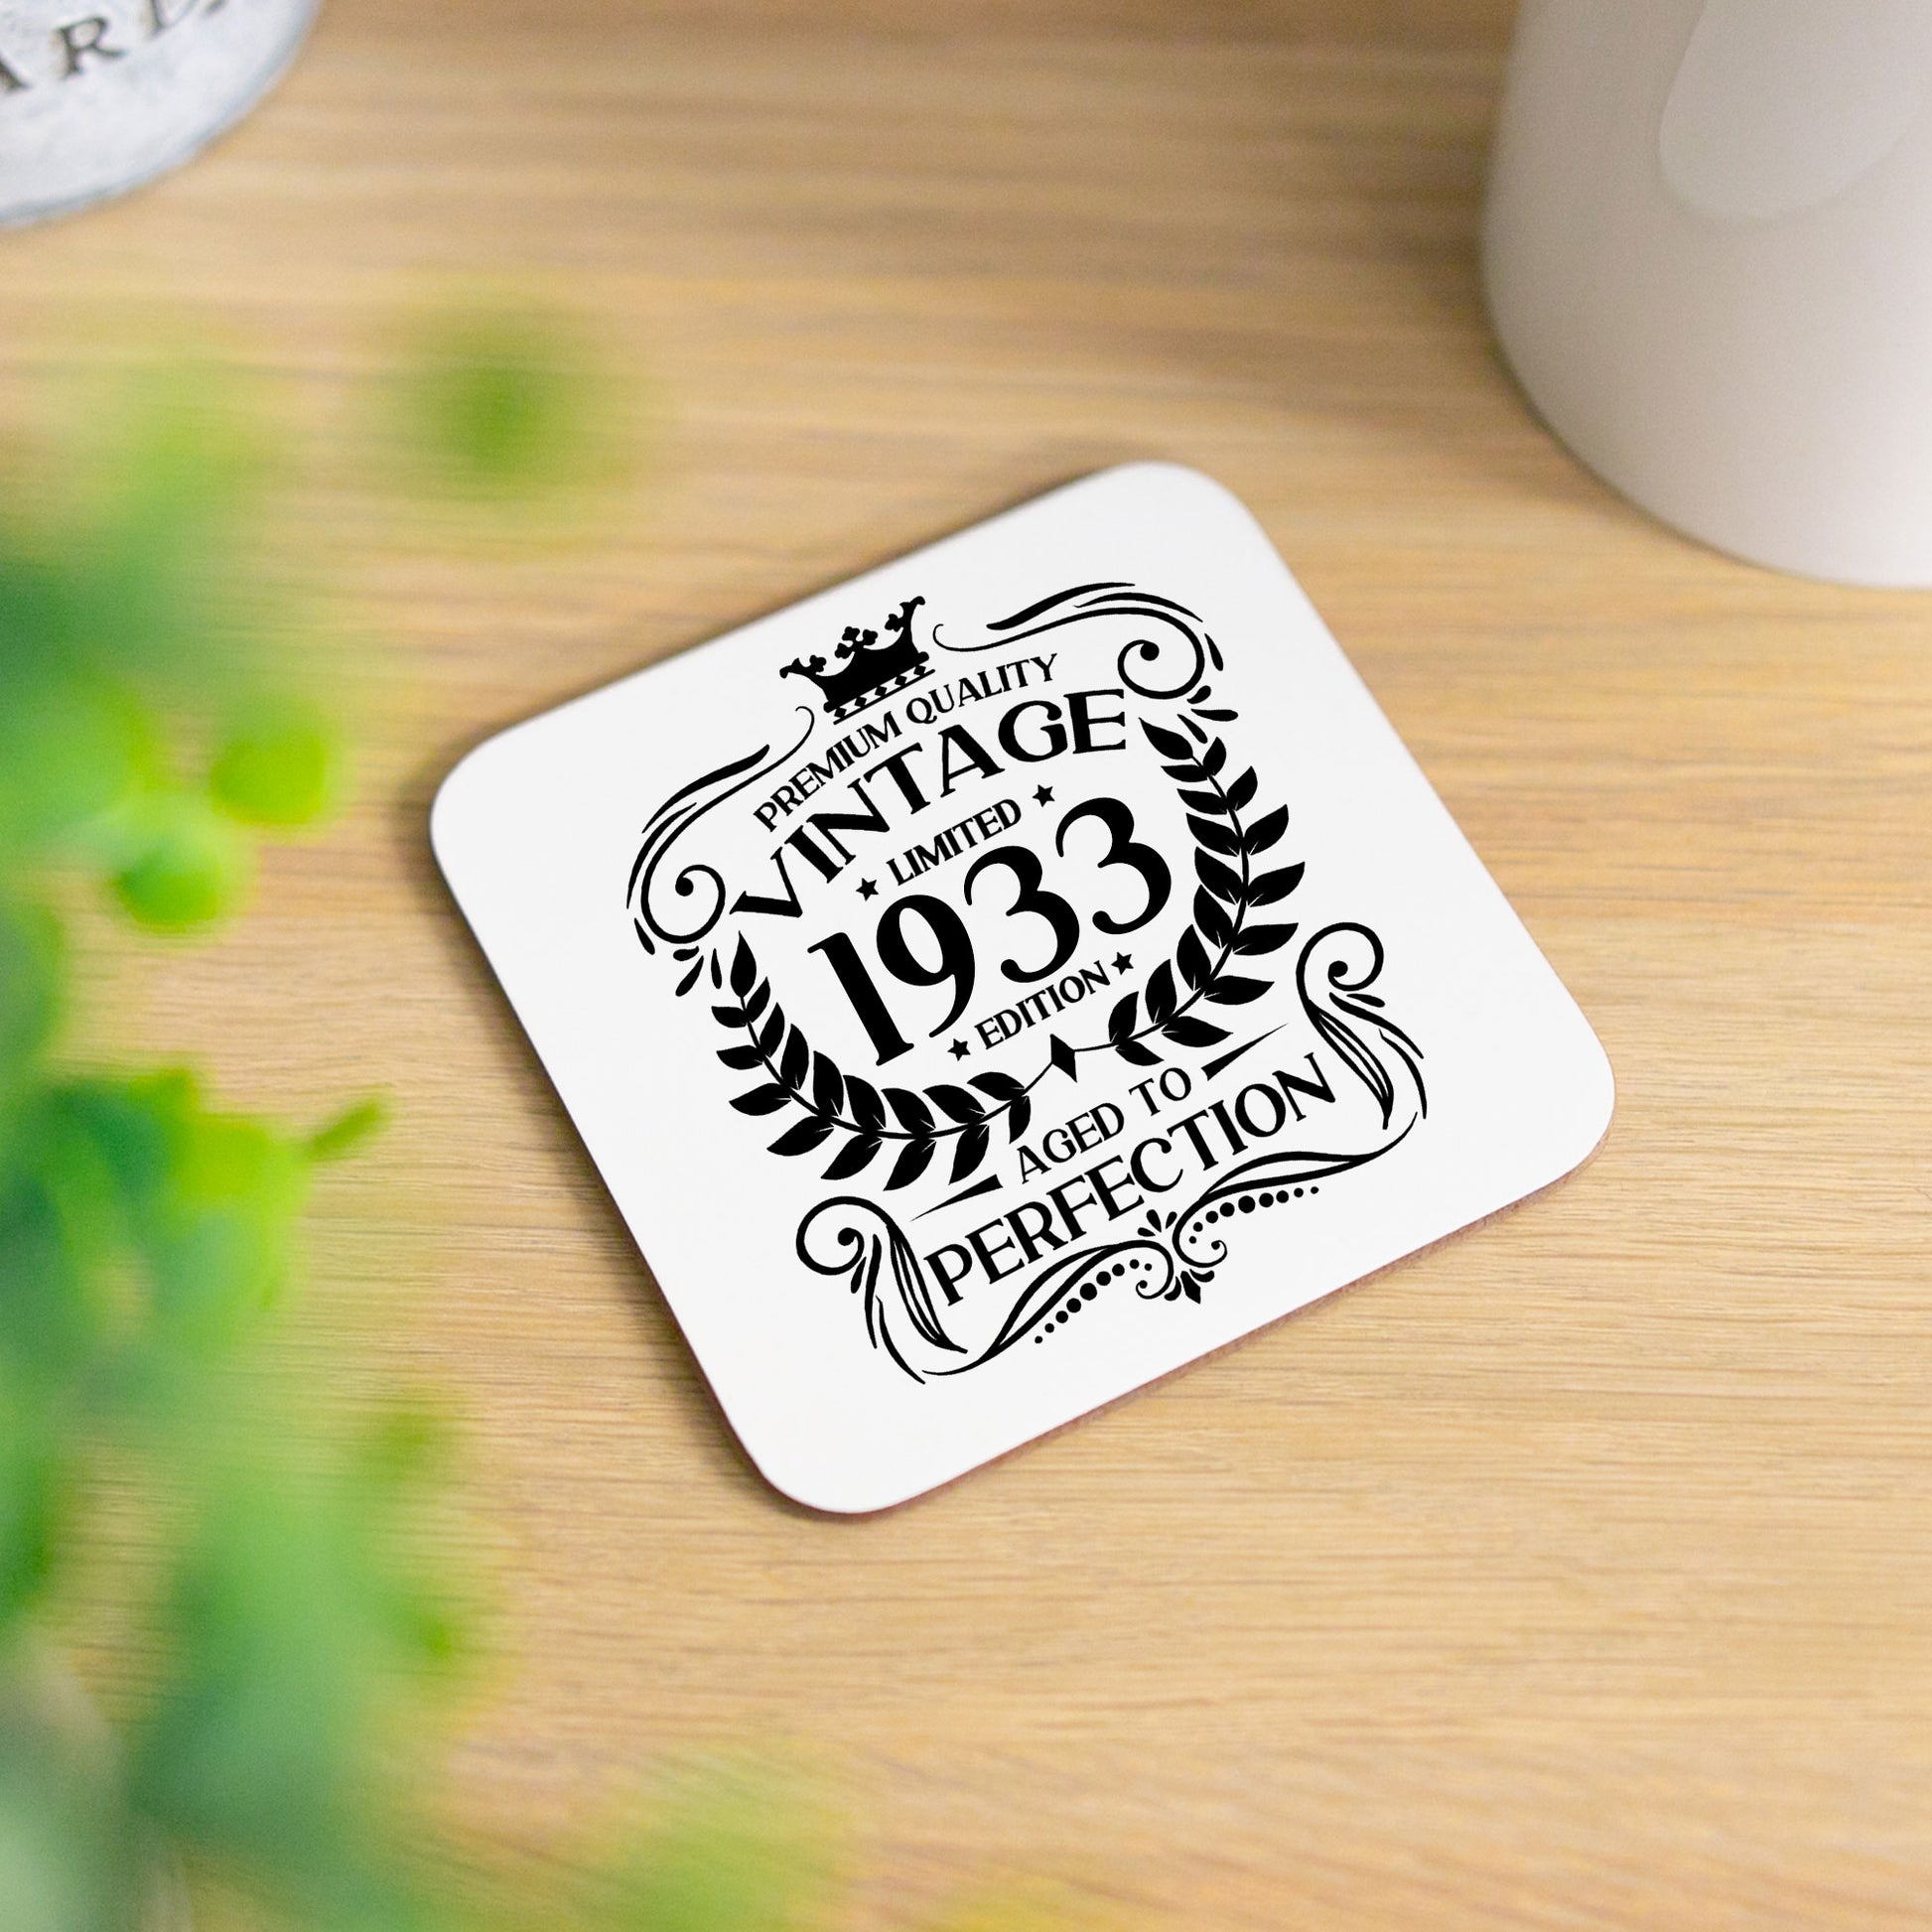 Vintage 1933 90th Birthday Engraved Stemless Gin Glass Gift  - Always Looking Good - Glass & Printed Coaster  